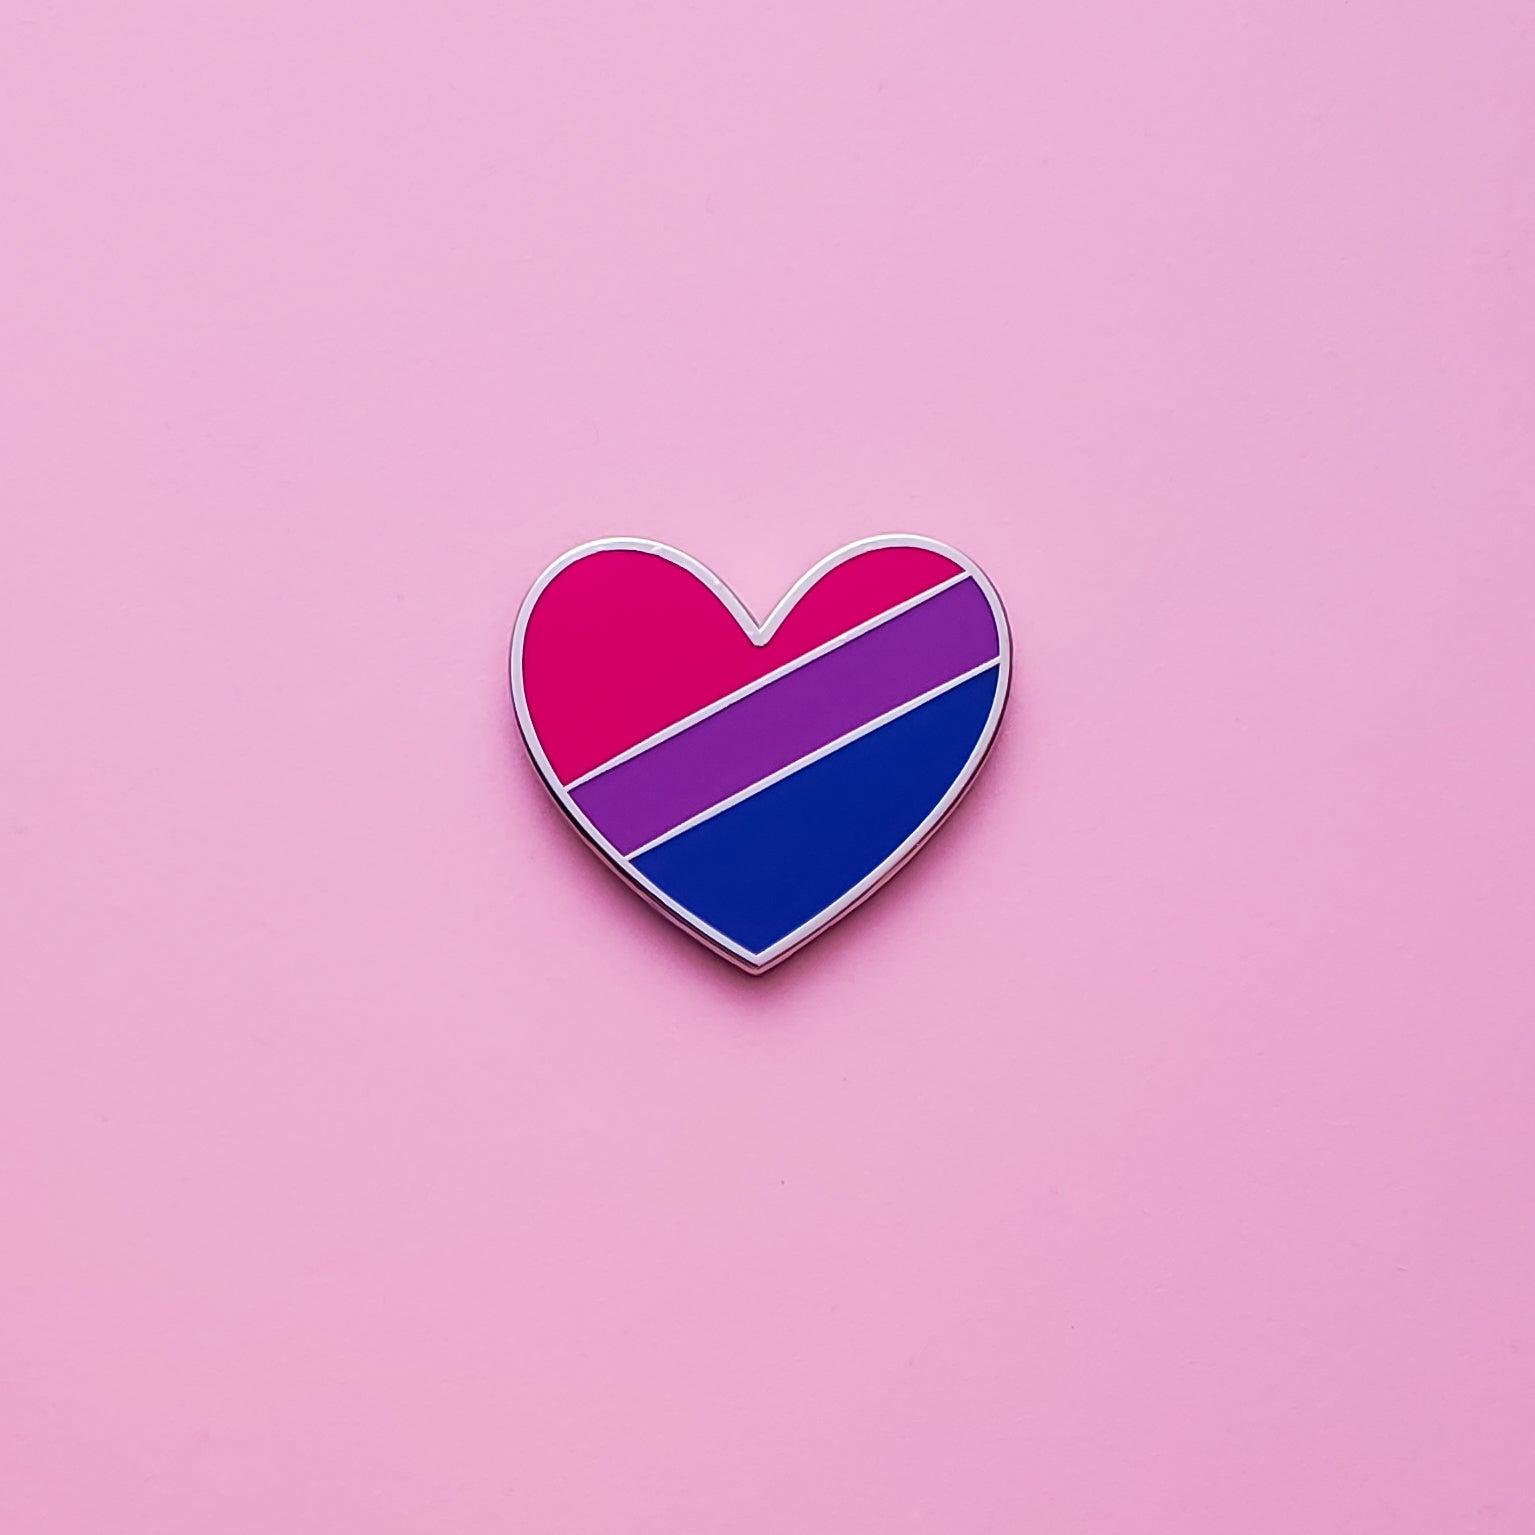 Bisexual Pride Heart Pin on a pink background. Pin is has vibrant bisexual pride colours set in a polished nickle metal. Bisexual pride pin colours are pink, purple and blue.Bi Heart Pin - LGBTQ Pride Pins | Little Rainbow Paper Co